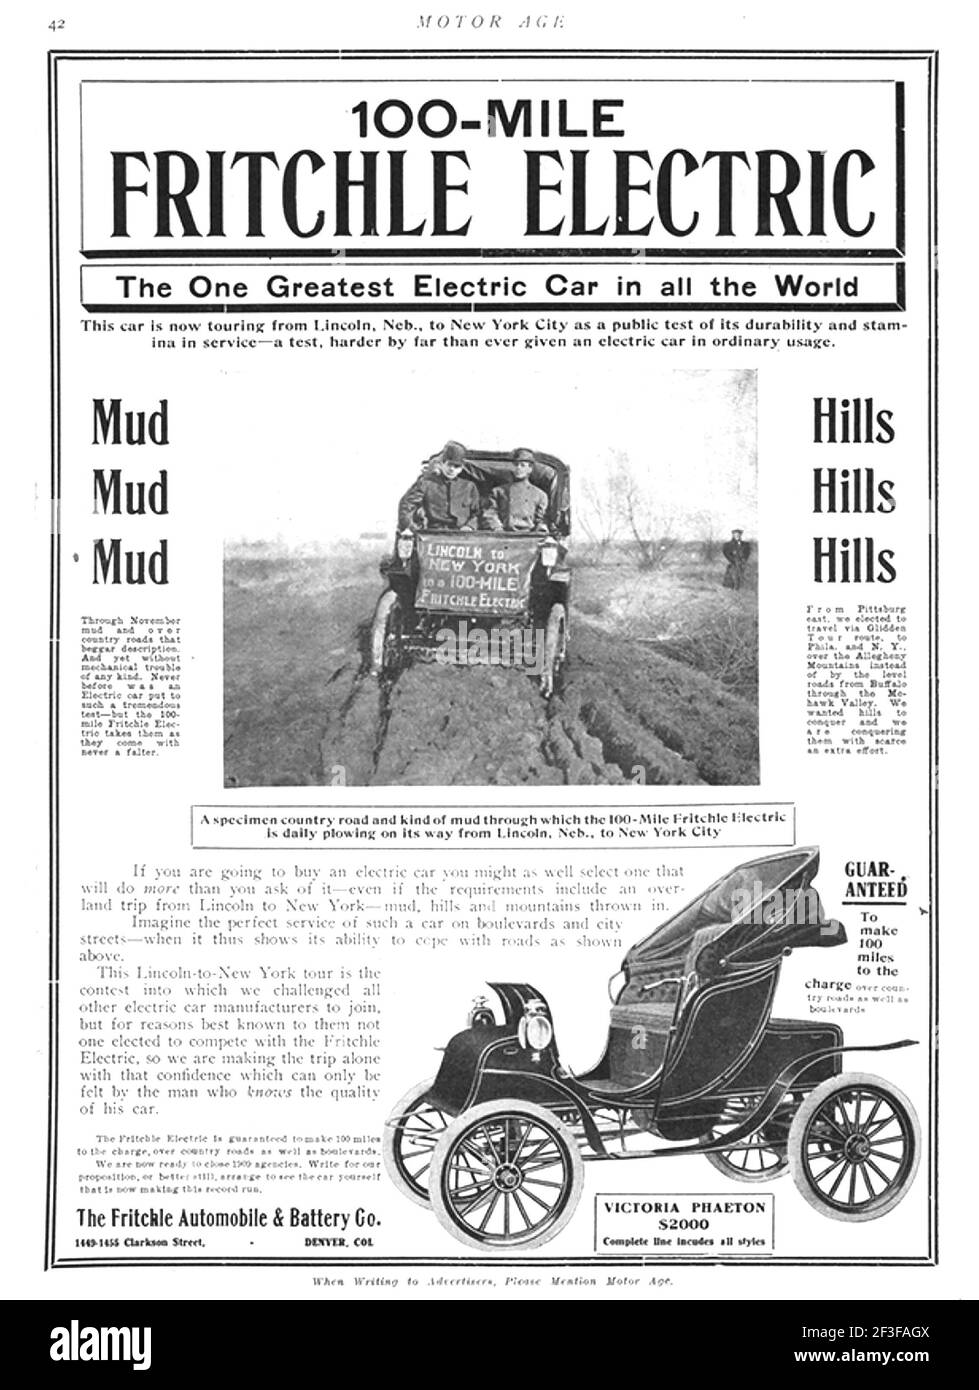 OLIVER FRITCHLE (1874-1951) American chemist and electric vehicle pioneer. Contemporary report on his epic 1800 mile drive in a standard Victoria Phaeton car in 1908 from Lincoln to New York Stock Photo